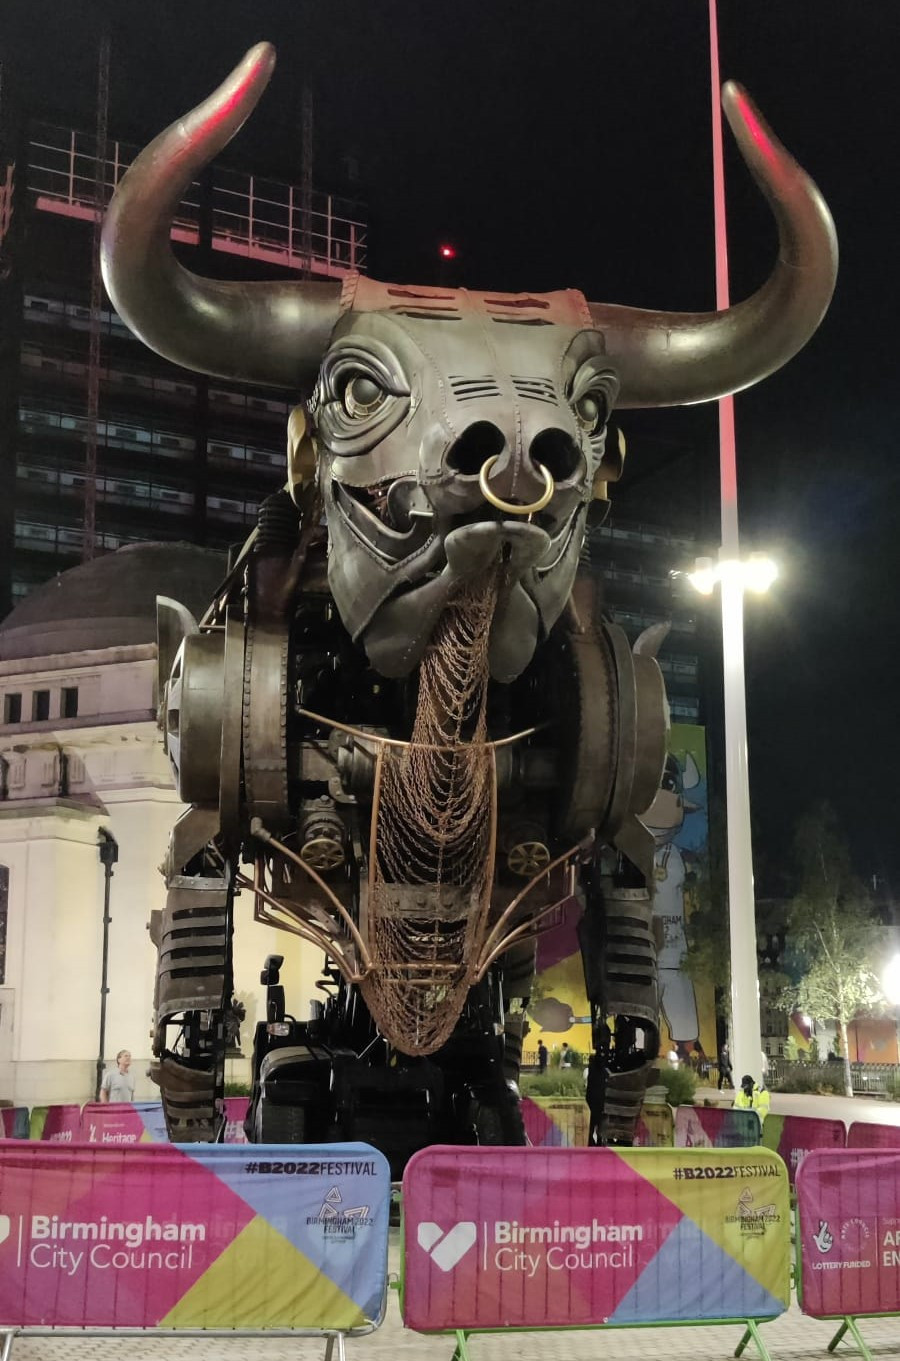 Campaign to "save our bull" launched as Birmingham 2022 Opening Ceremony star becomes instant icon